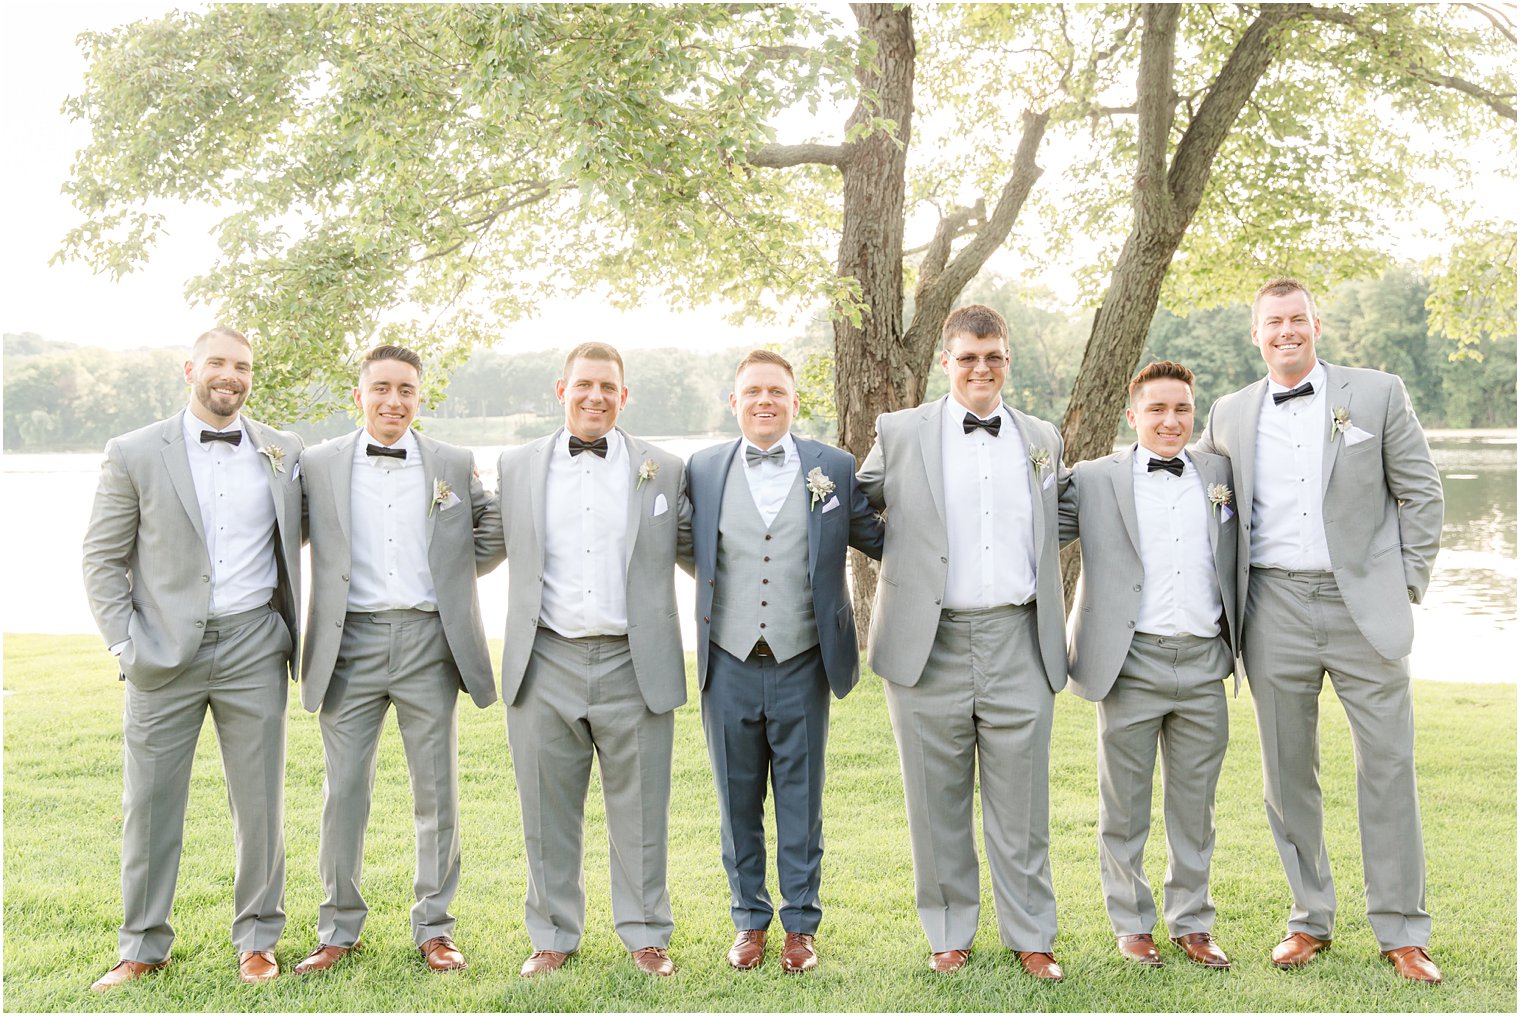 Groom and groomsmen wearing blue and gray